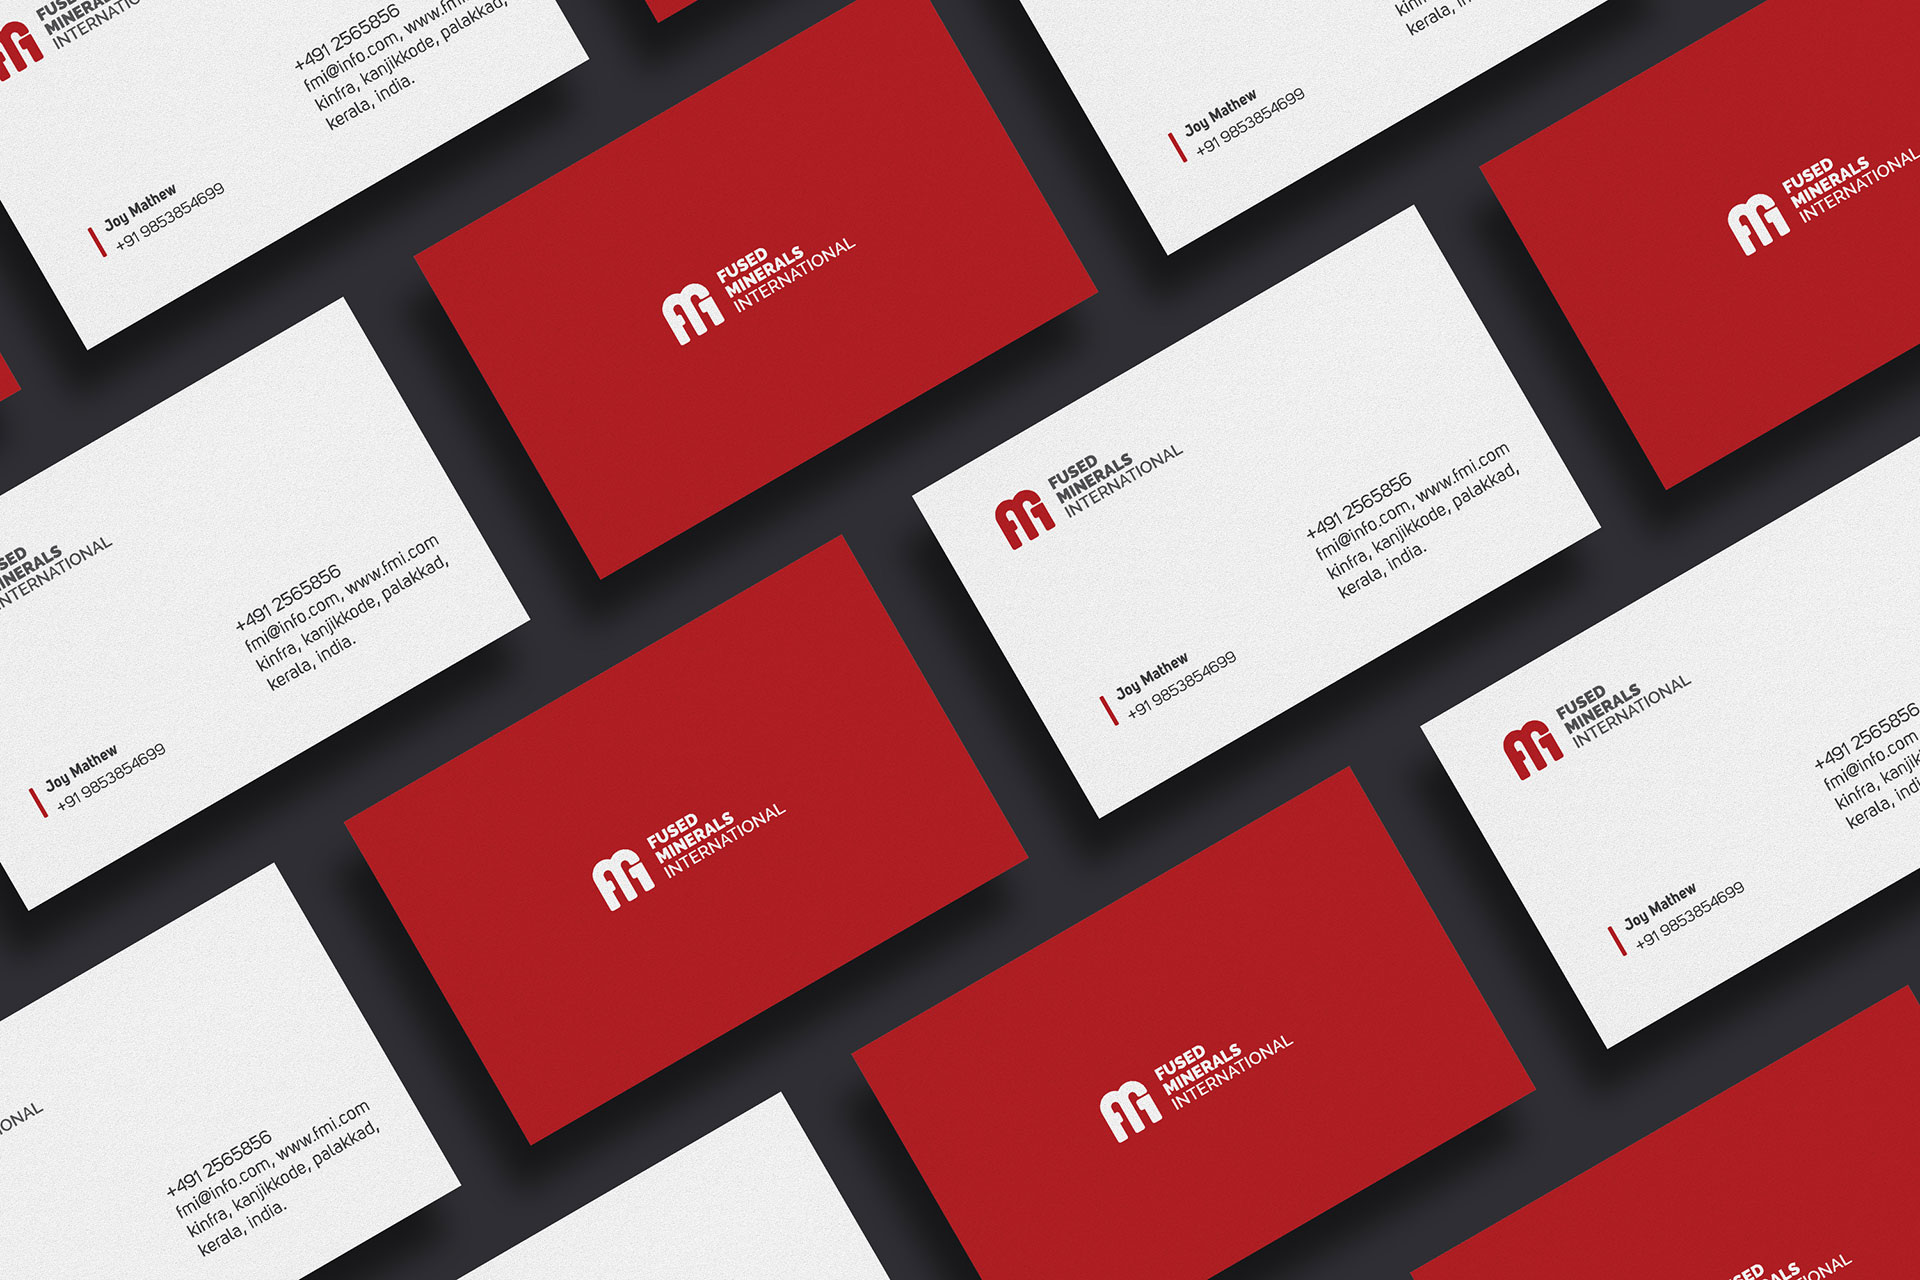 Tiles of FMI business card designs in red and white colors